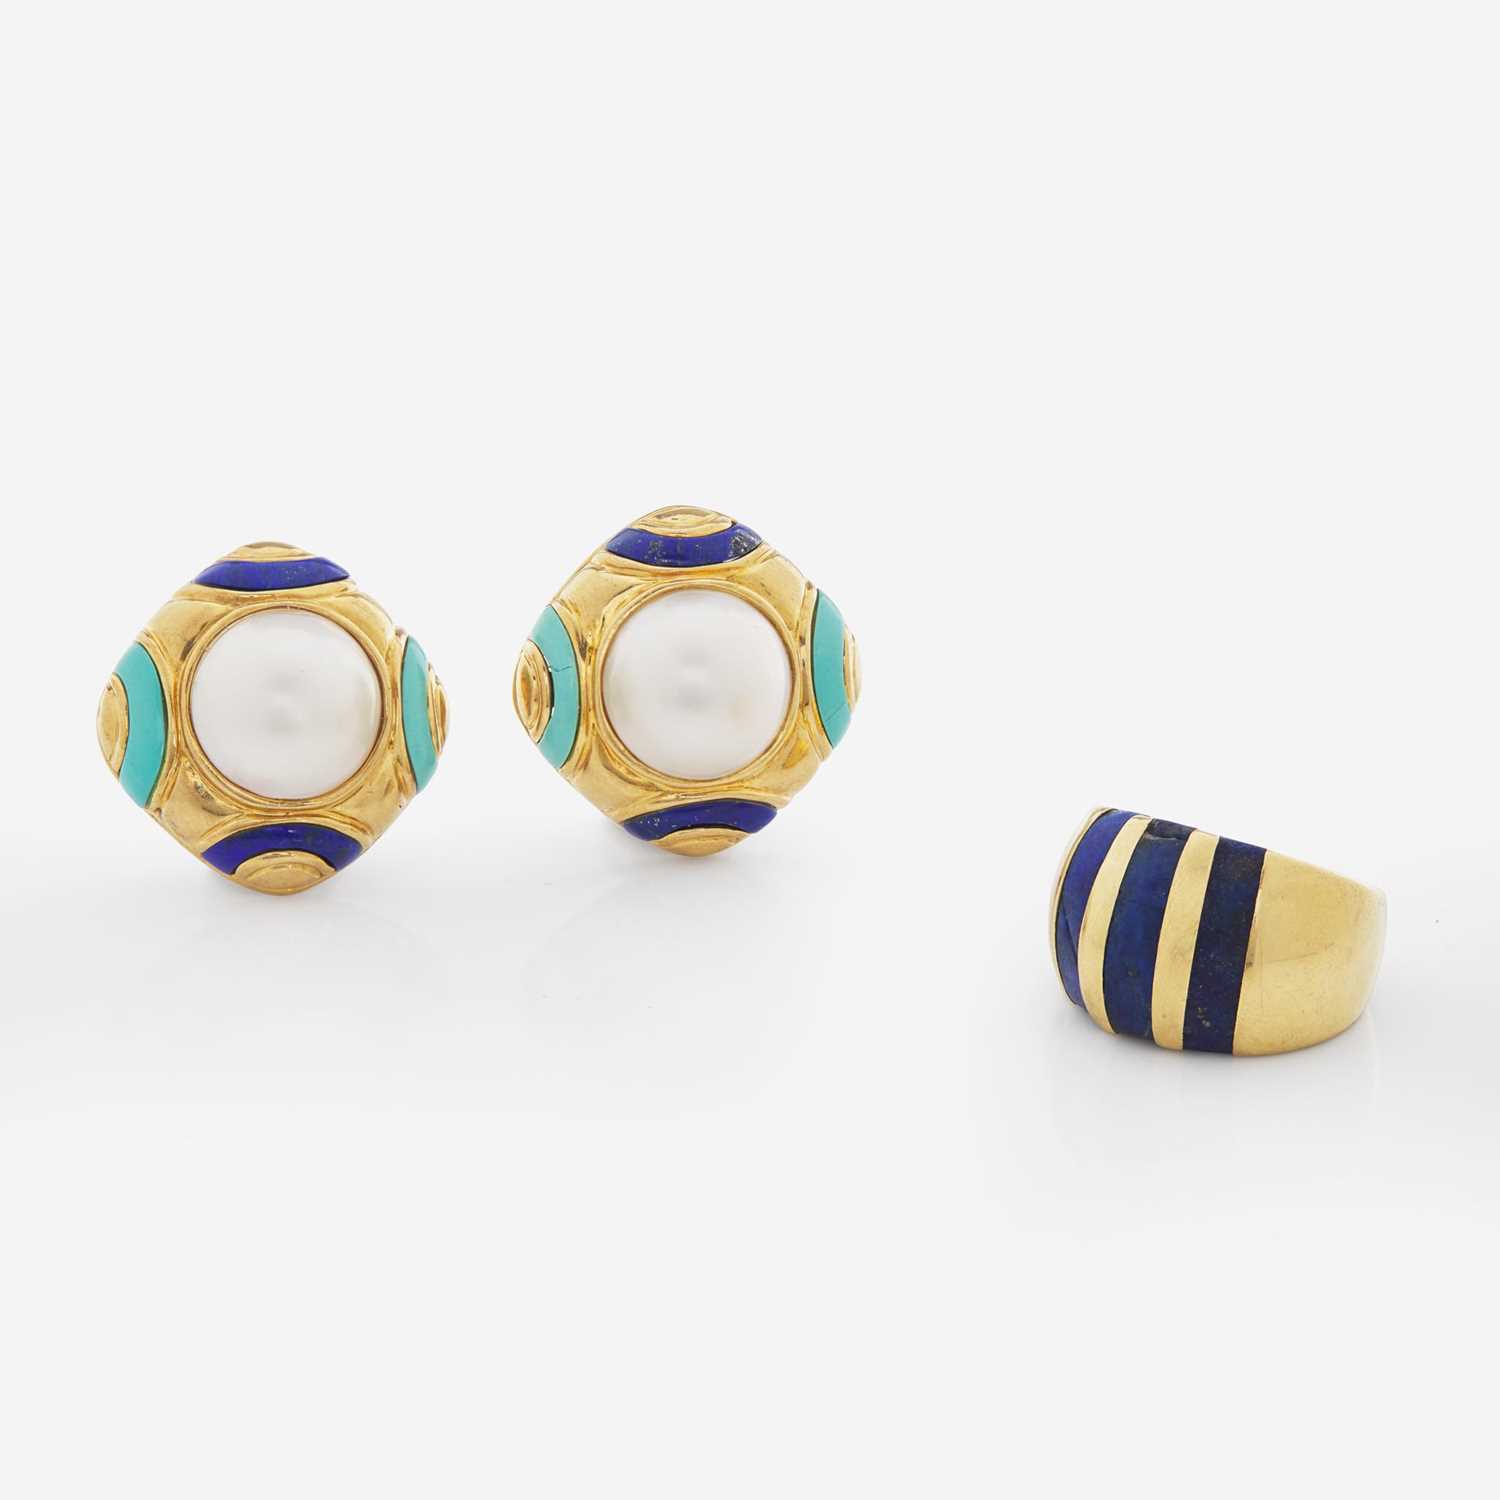 Lot 40 - A Set of 18K Yellow Gold and Gemstone Ear Clips and Ring